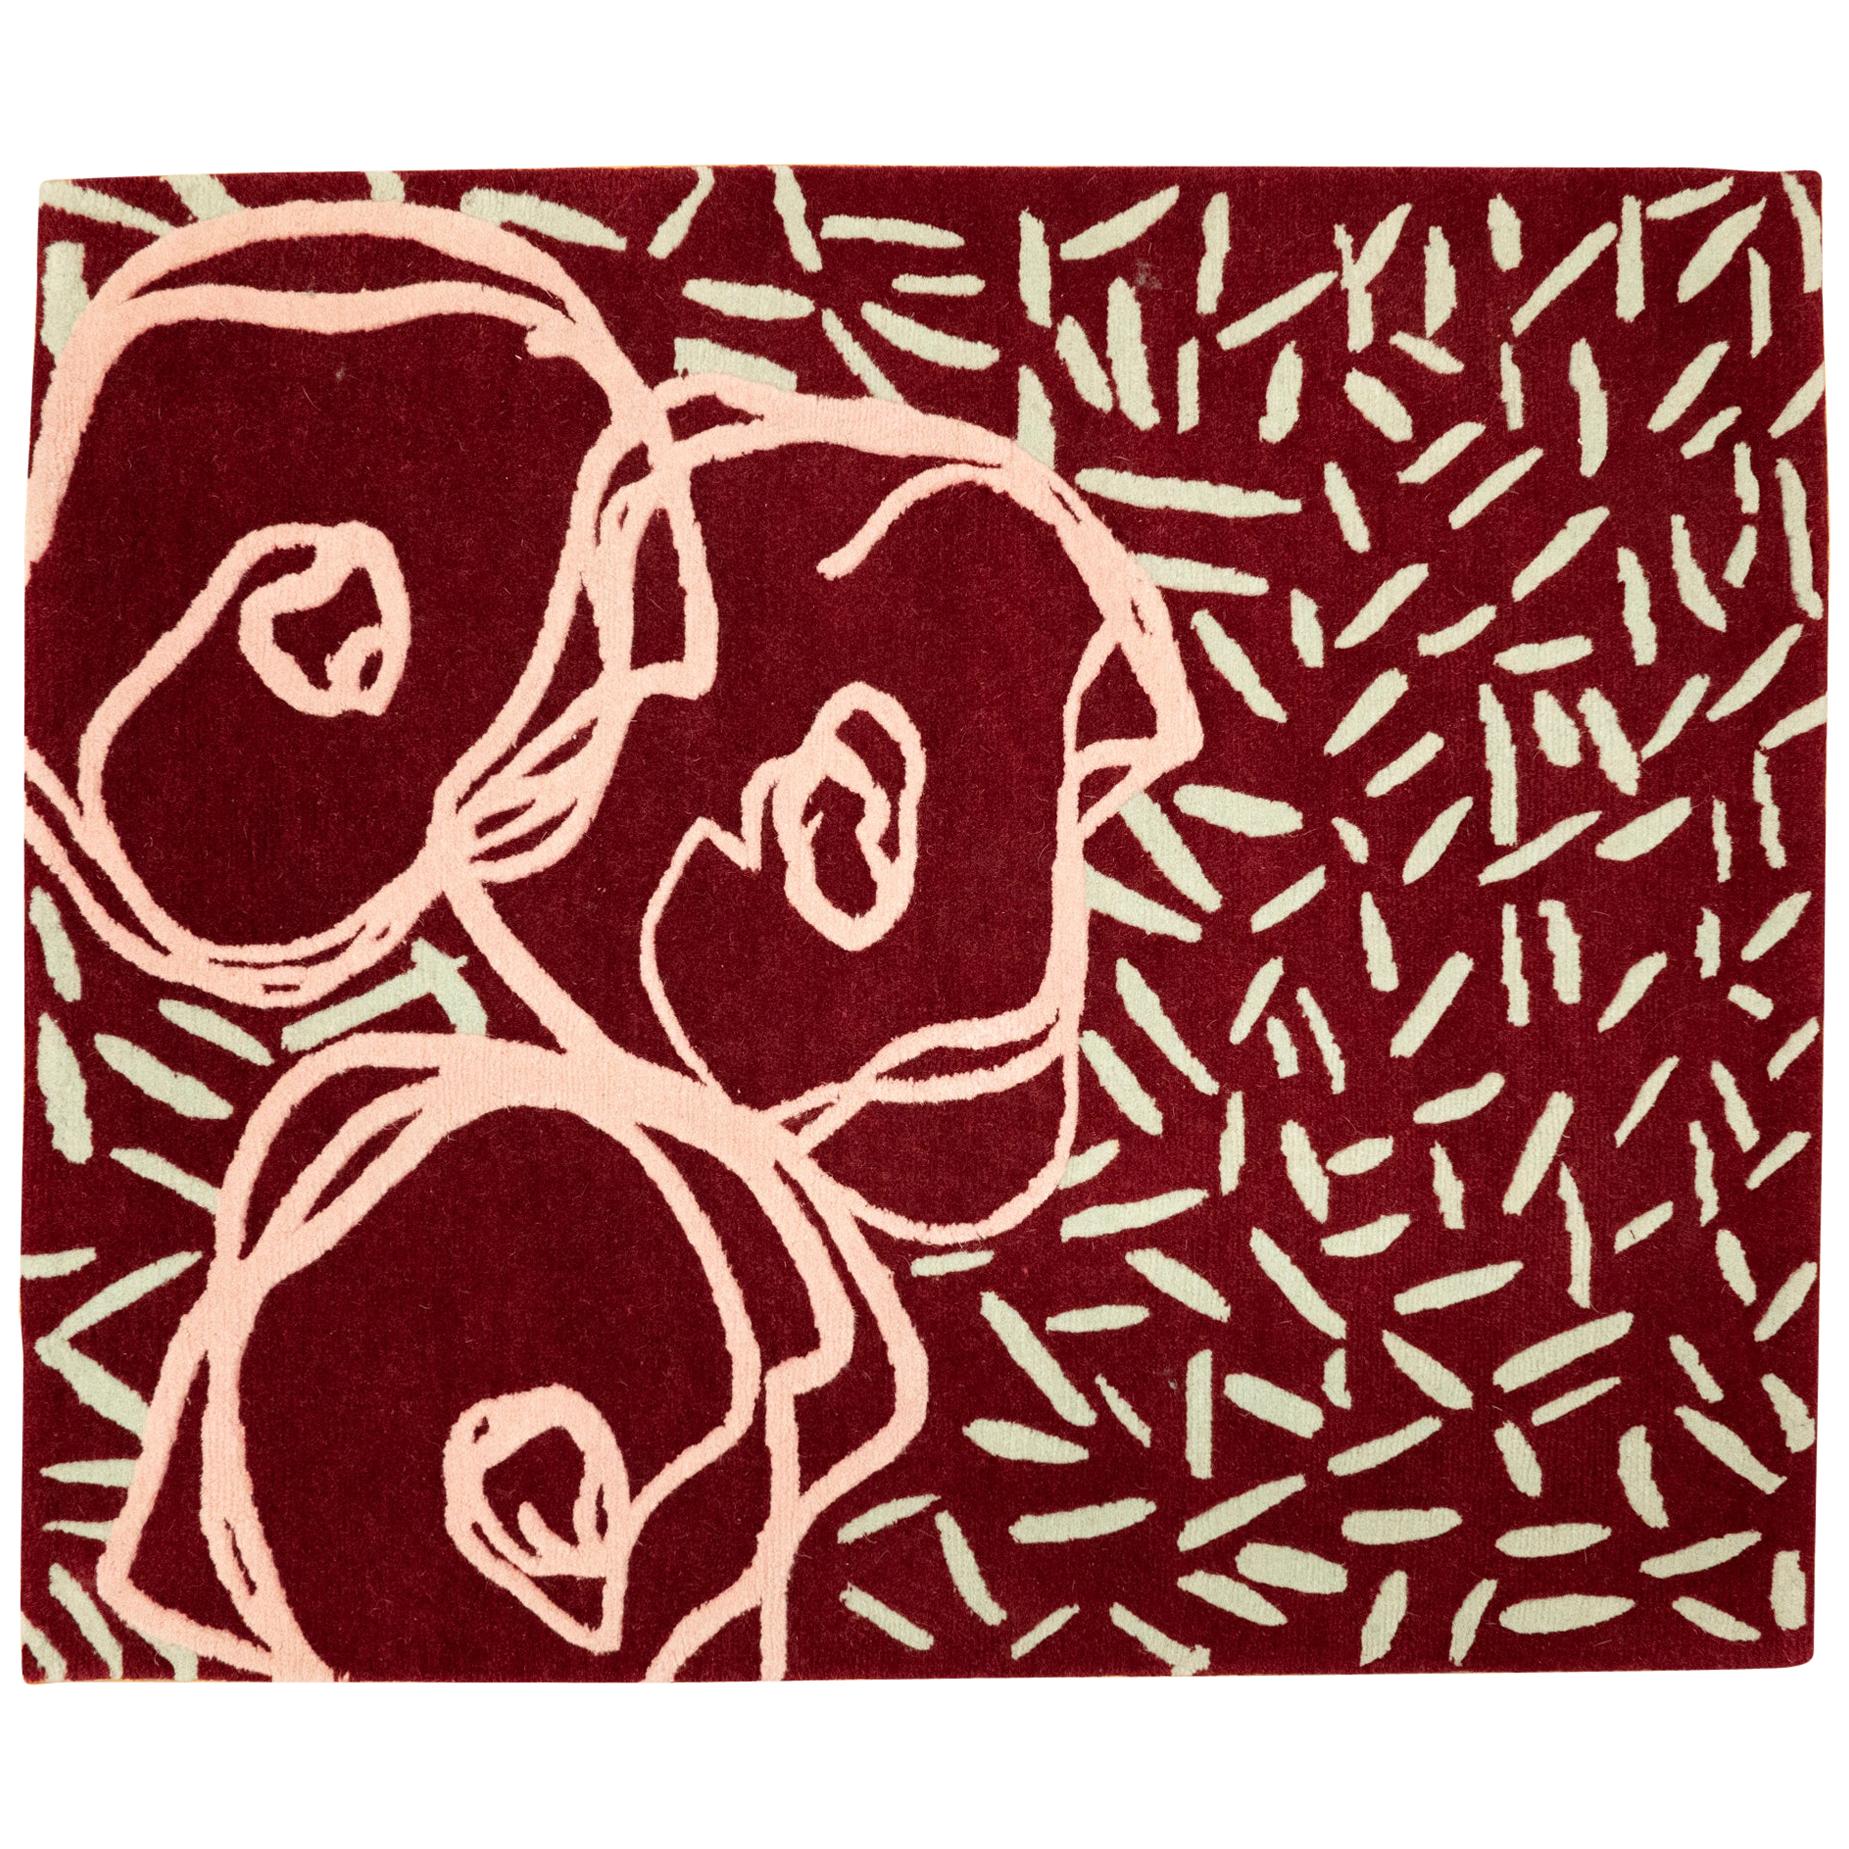 Contemporary Handmade Red Flower Rug, Custom Size and Colors, Ideal for Side Bed